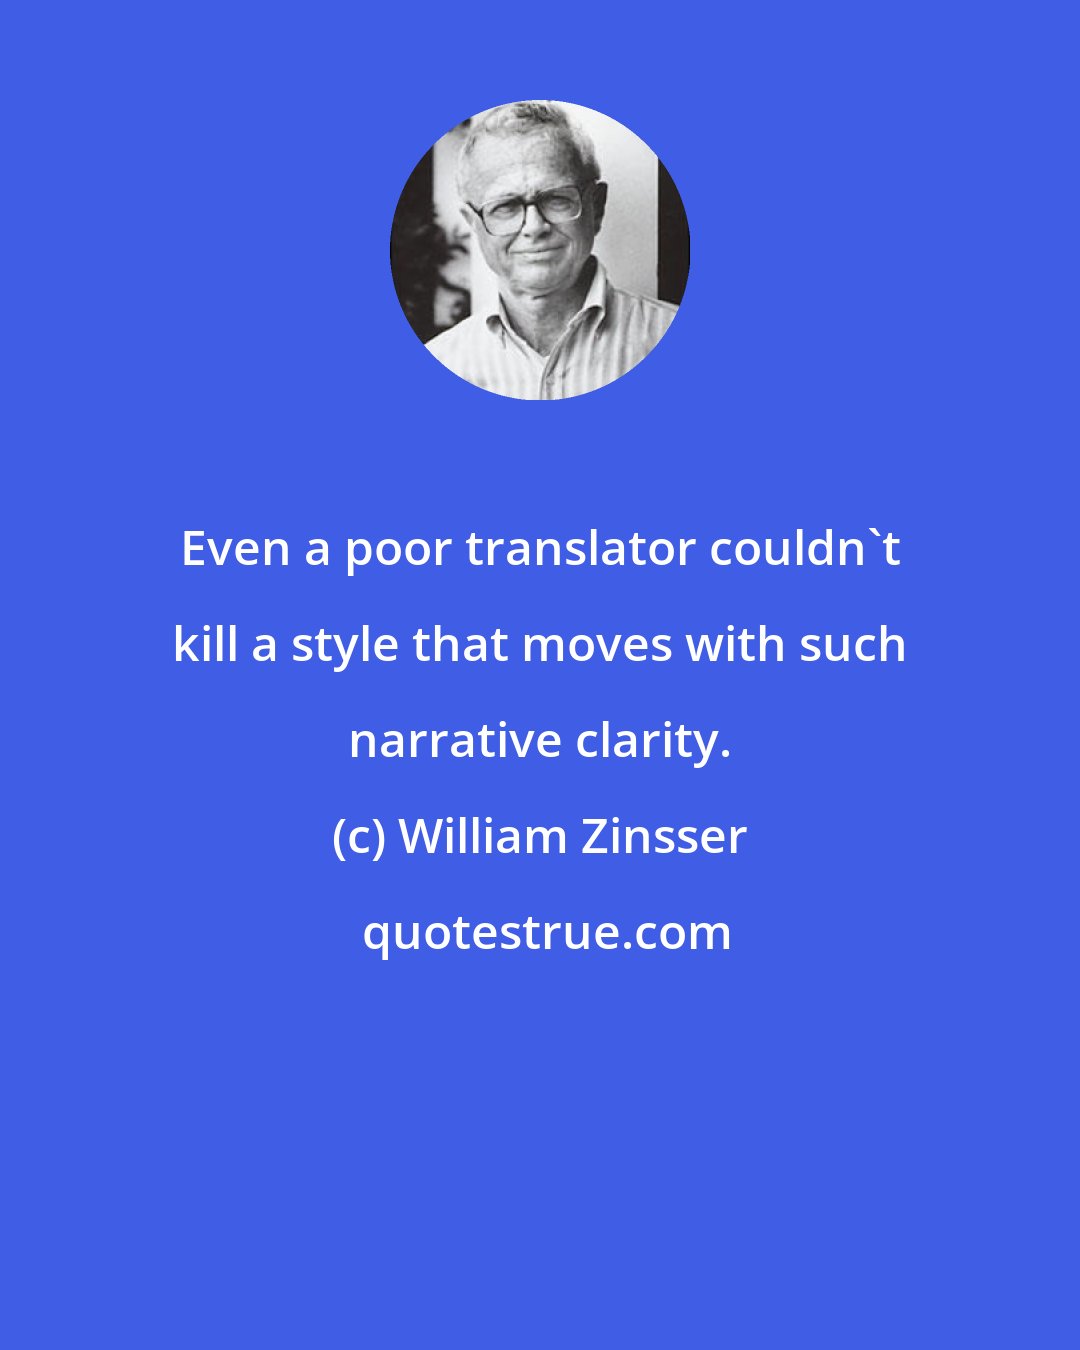 William Zinsser: Even a poor translator couldn't kill a style that moves with such narrative clarity.